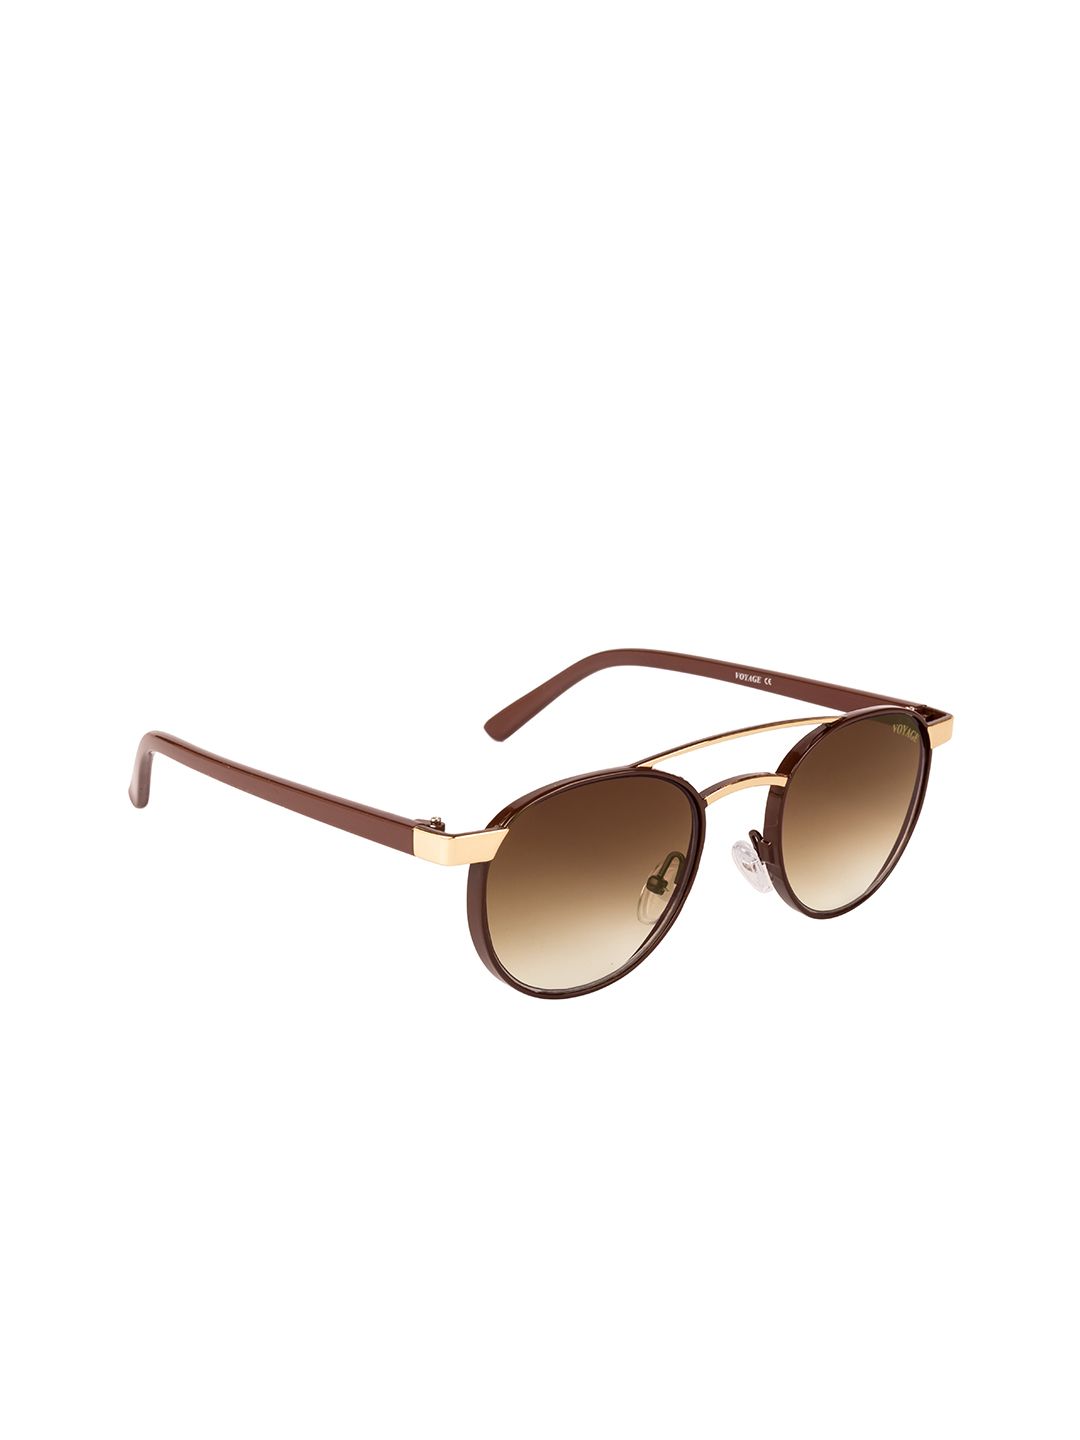 Voyage Unisex Brown Lens & Brown Round Sunglasses with UV Protected Lens B80496MG3501Z Price in India